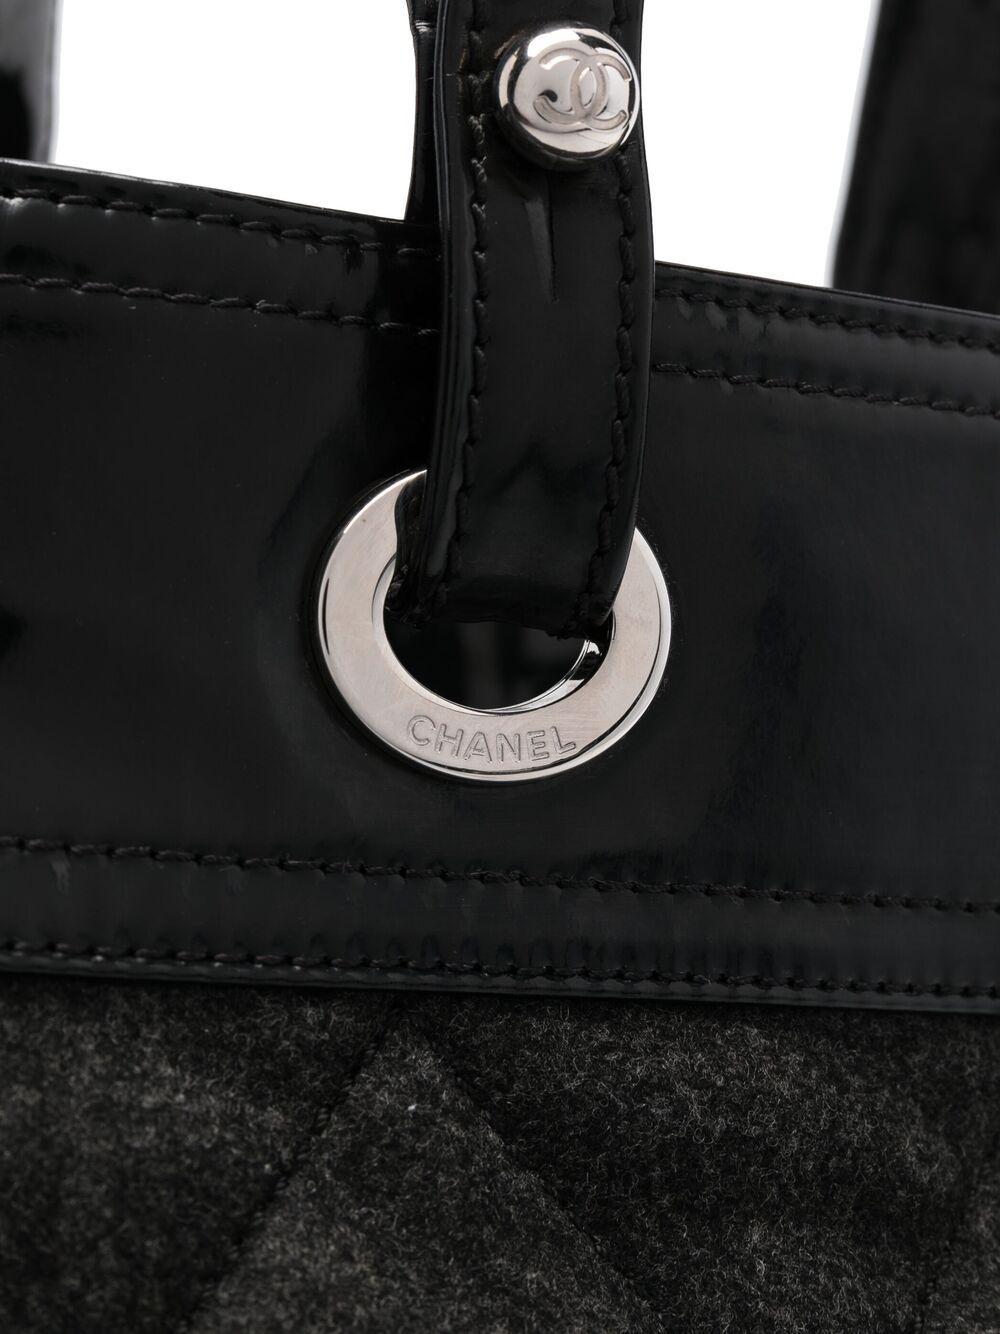 2009 Chanel by Karl Lagerfeld Biarritz Grey Wool Tote Bag In Excellent Condition For Sale In Paris, FR